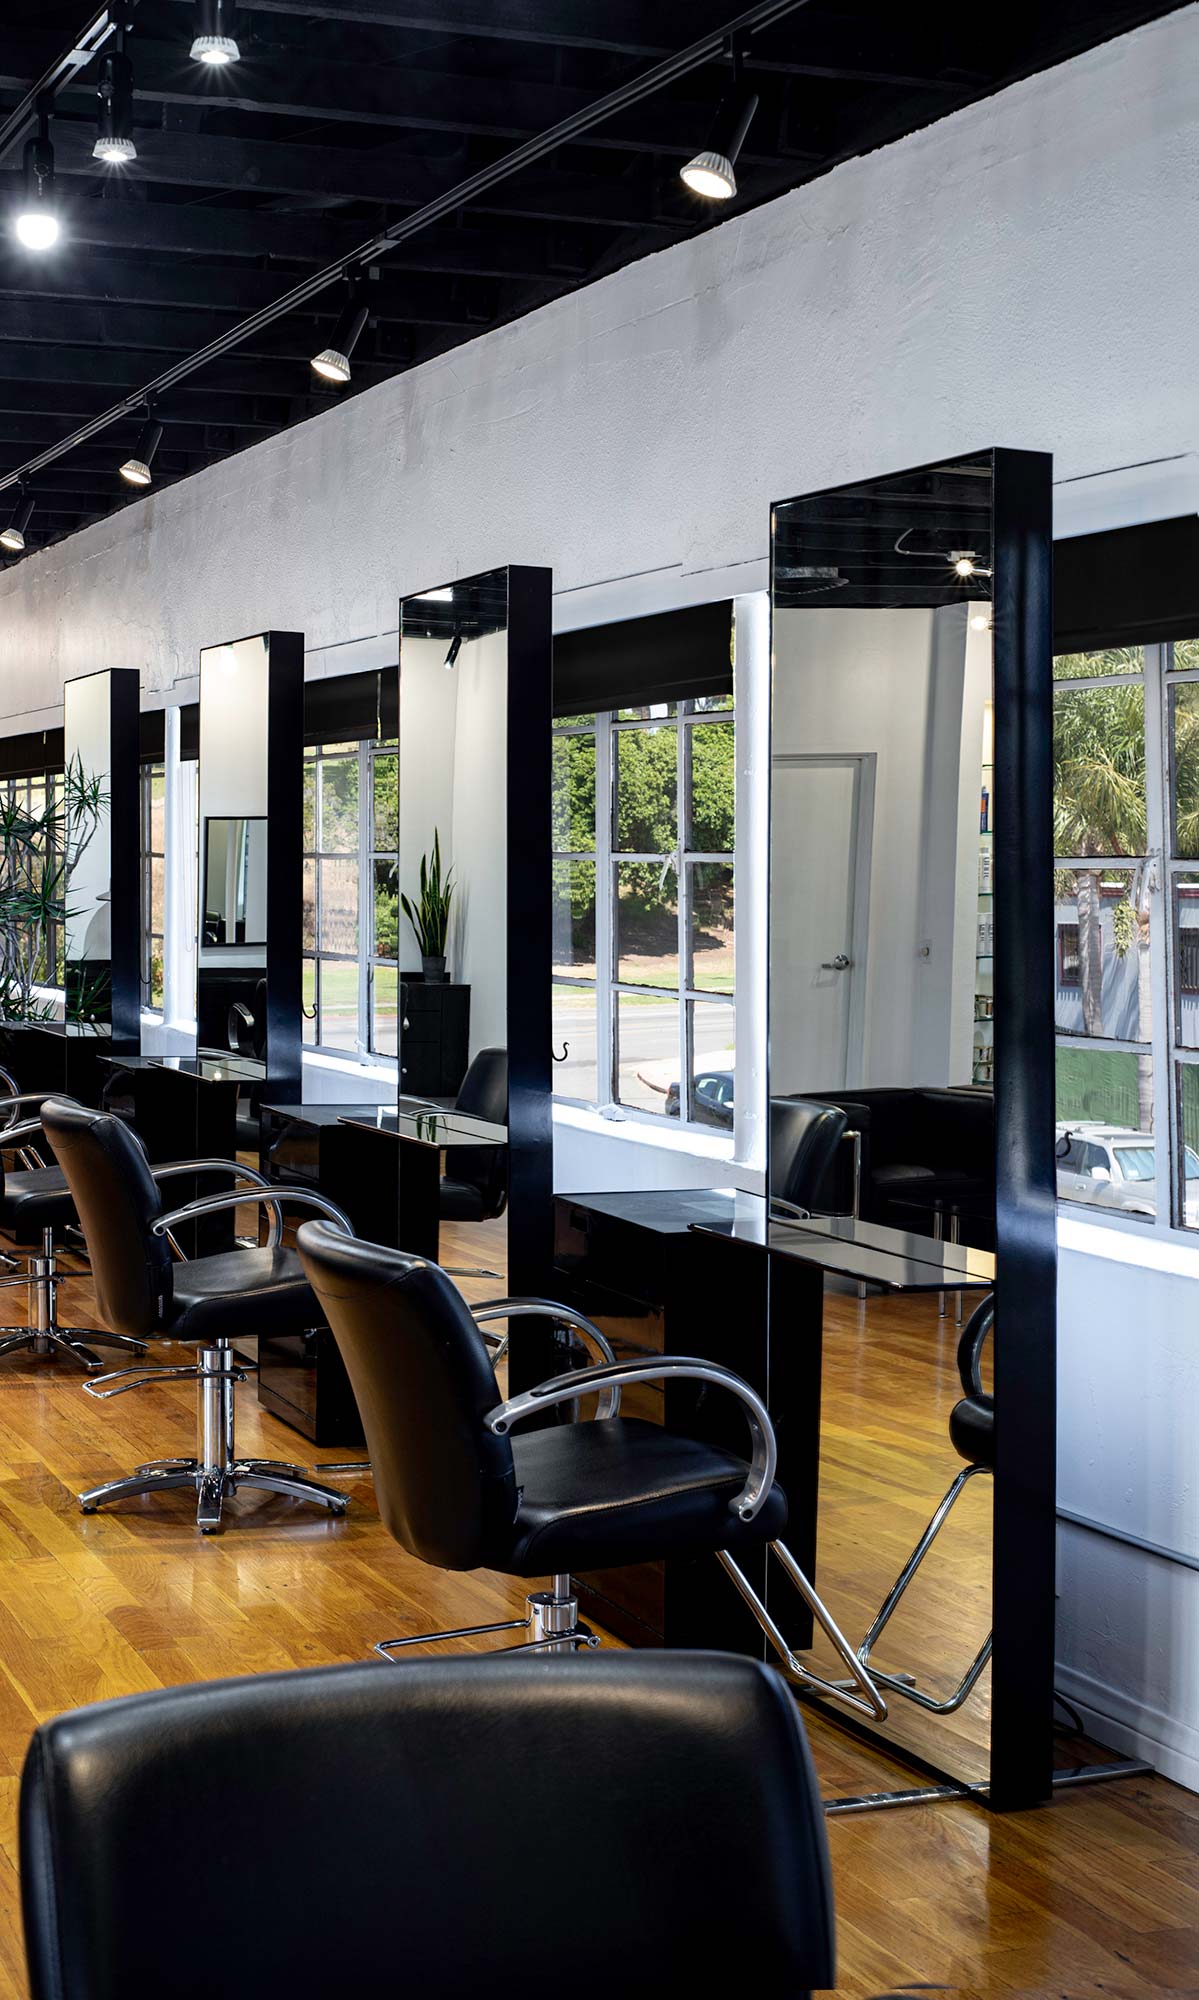 About - Cut Hairdressing